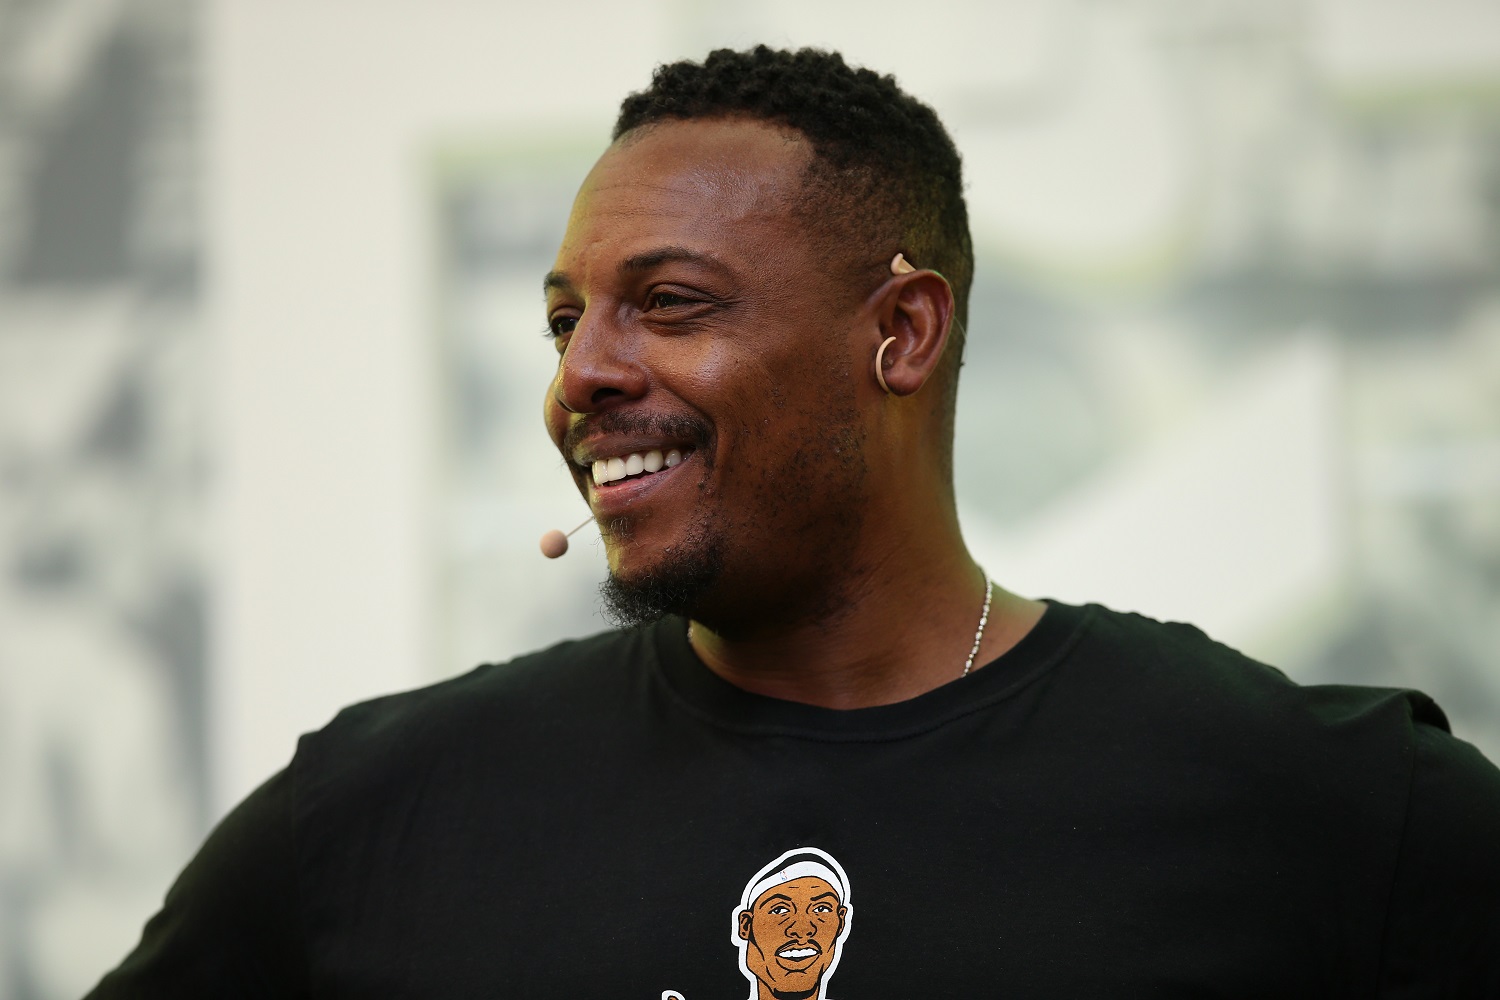 Paul Pierce moved directly into a career as an NBA analyst for ESPN following his retirement as a player. | Jason McCawley/Getty Images